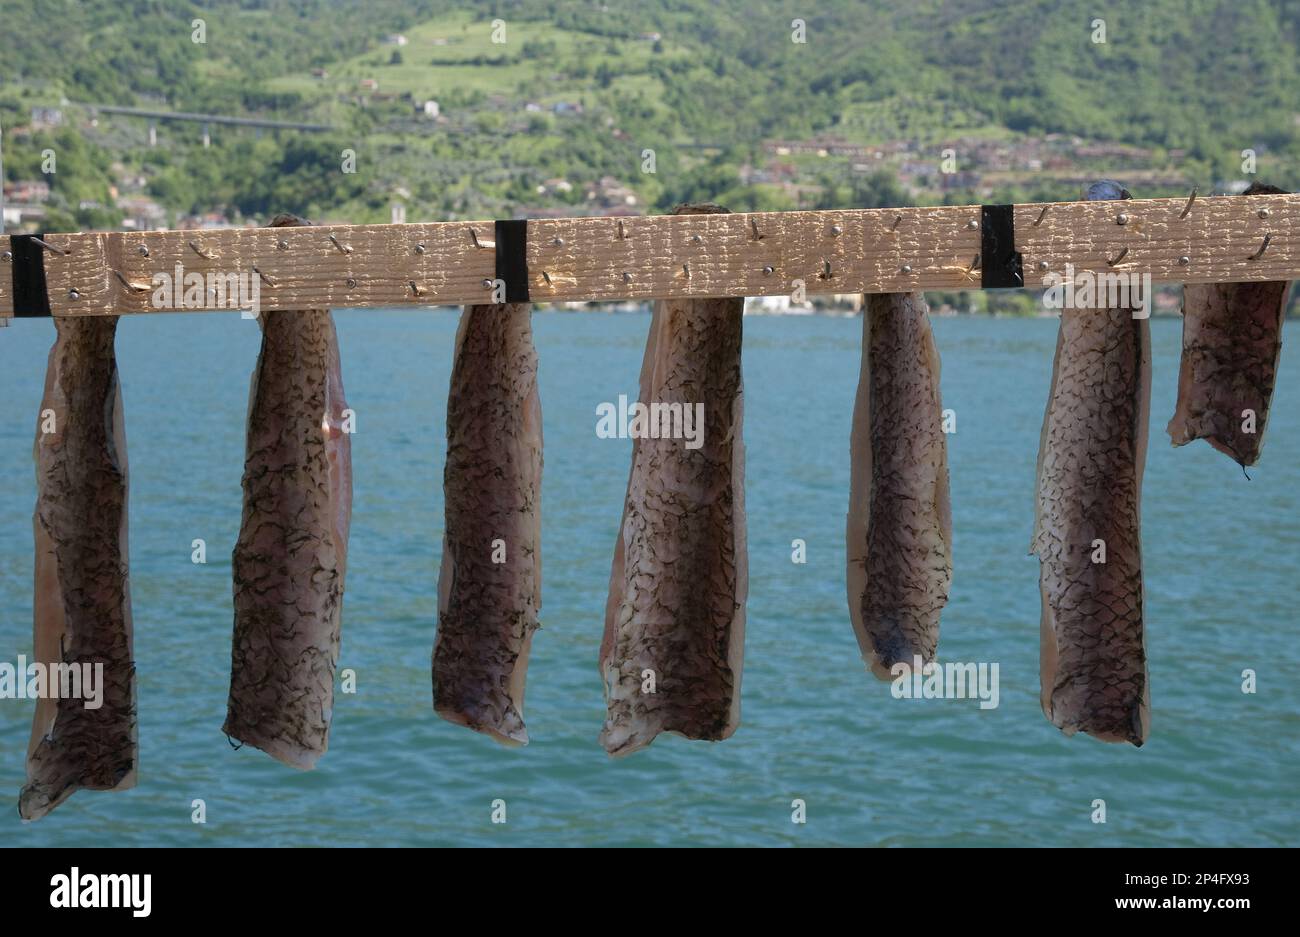 Drying freshwater fish, Monte Isola, Lago dIseo, Lombardy, Italy Stock Photo